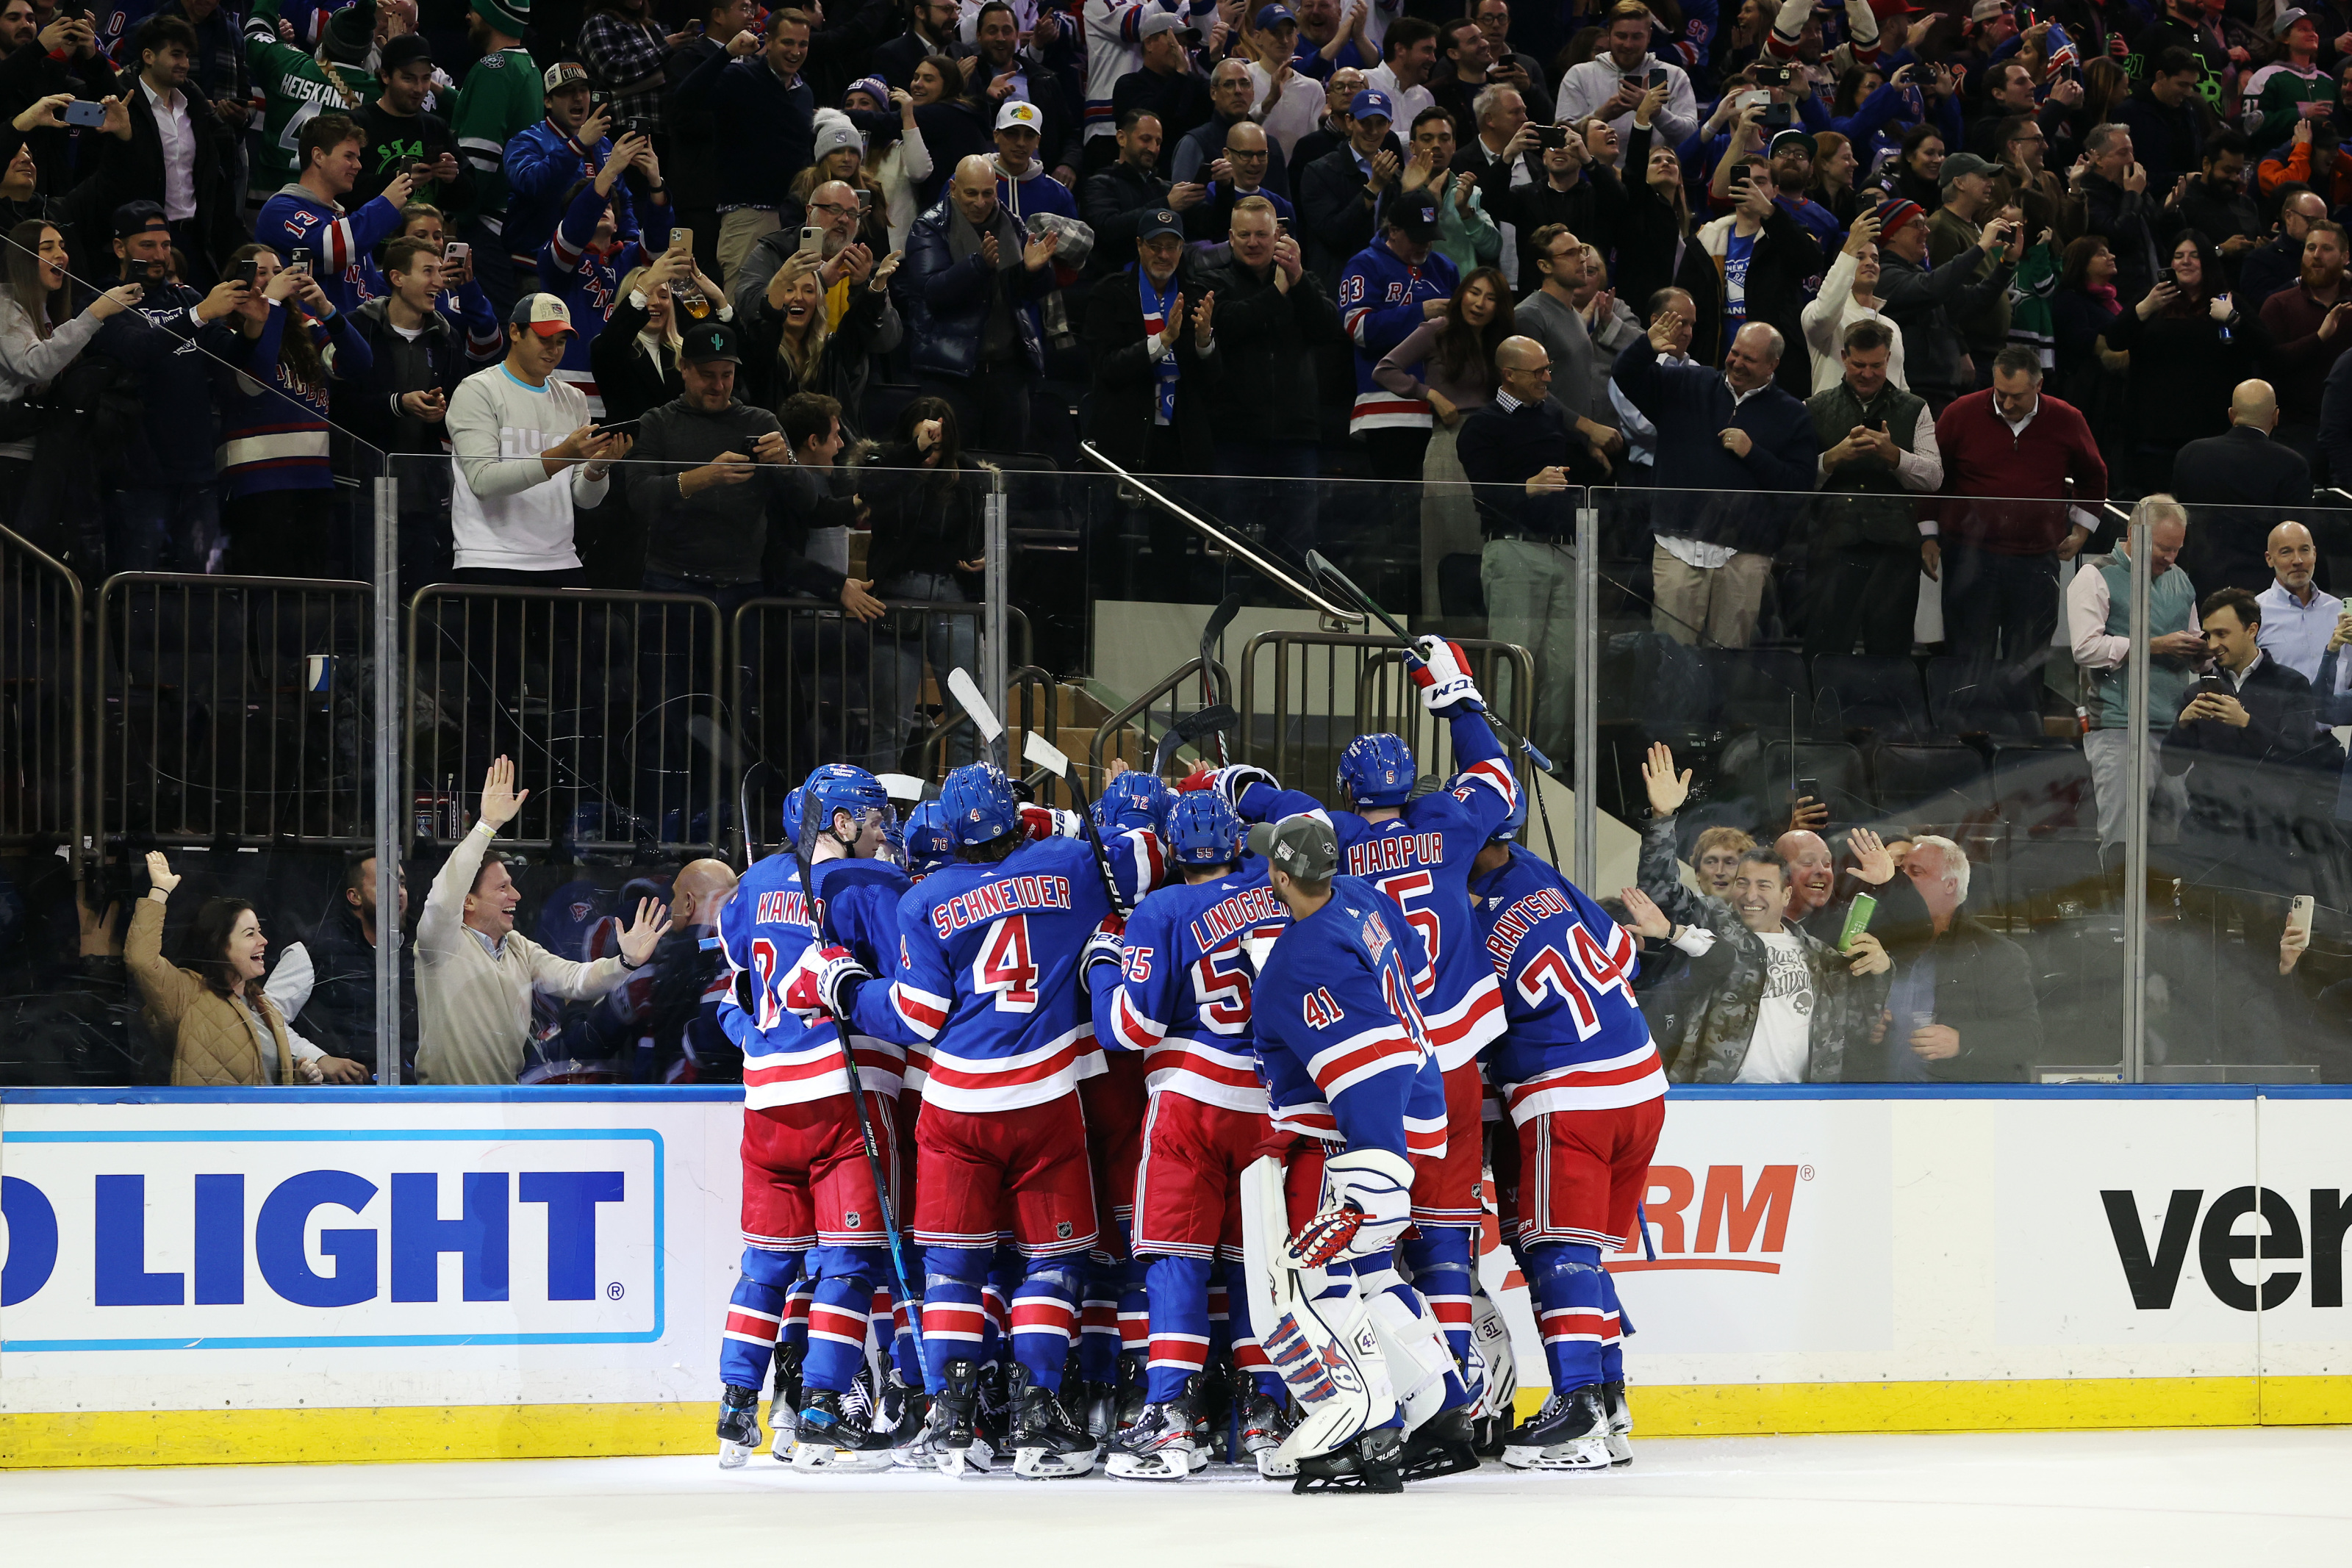 The New York Rangers celebrate their victory over the Minnesota